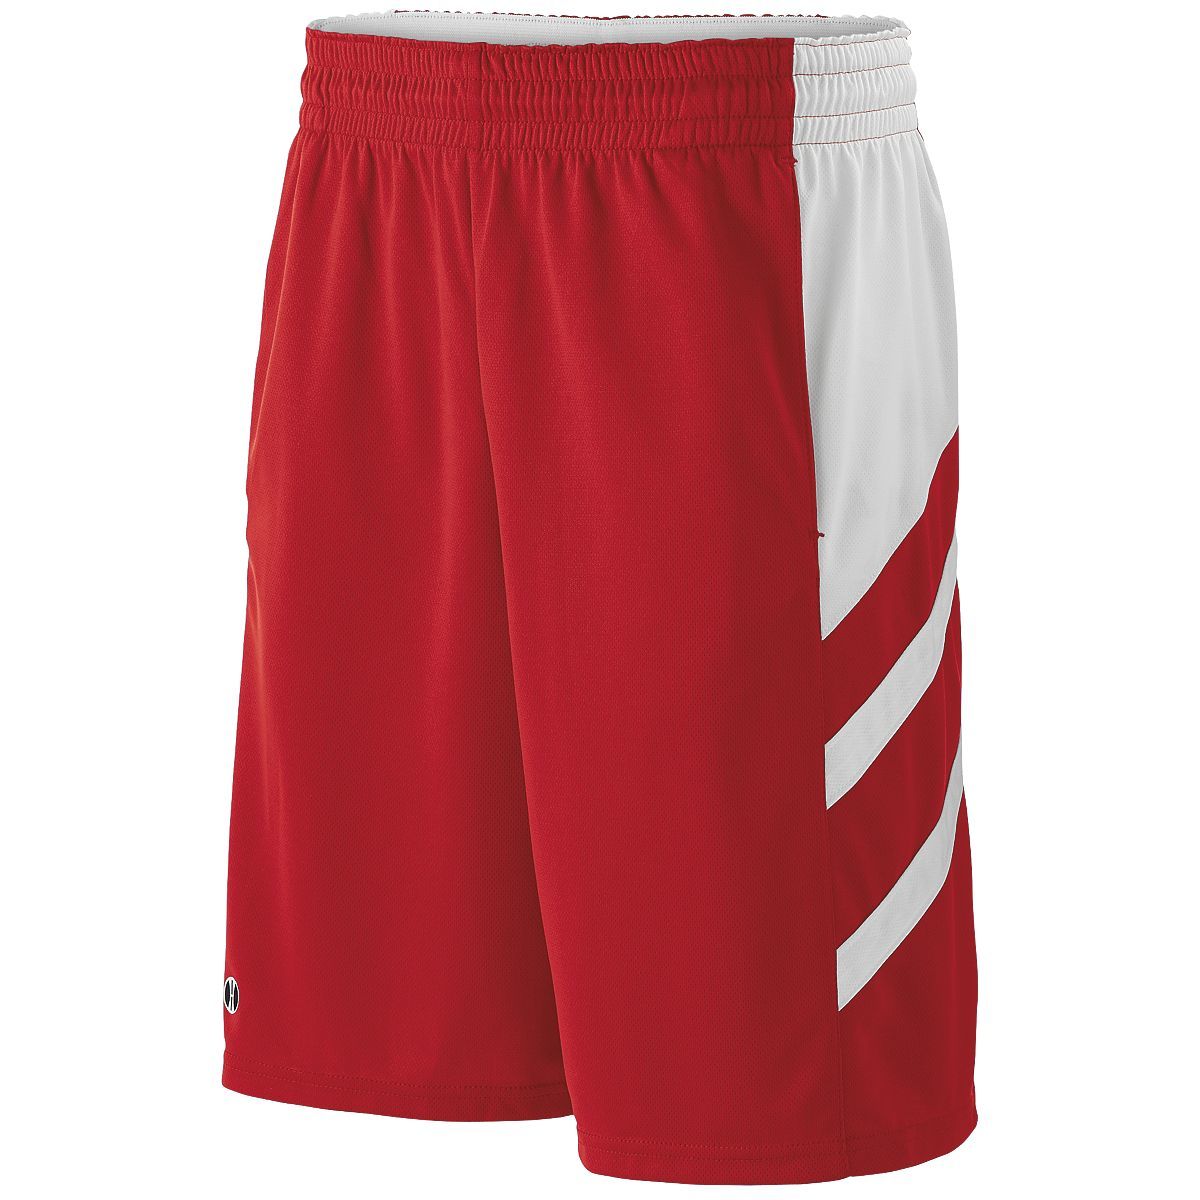 Holloway Helium Shorts in Scarlet/White  -Part of the Adult, Adult-Shorts, Holloway product lines at KanaleyCreations.com